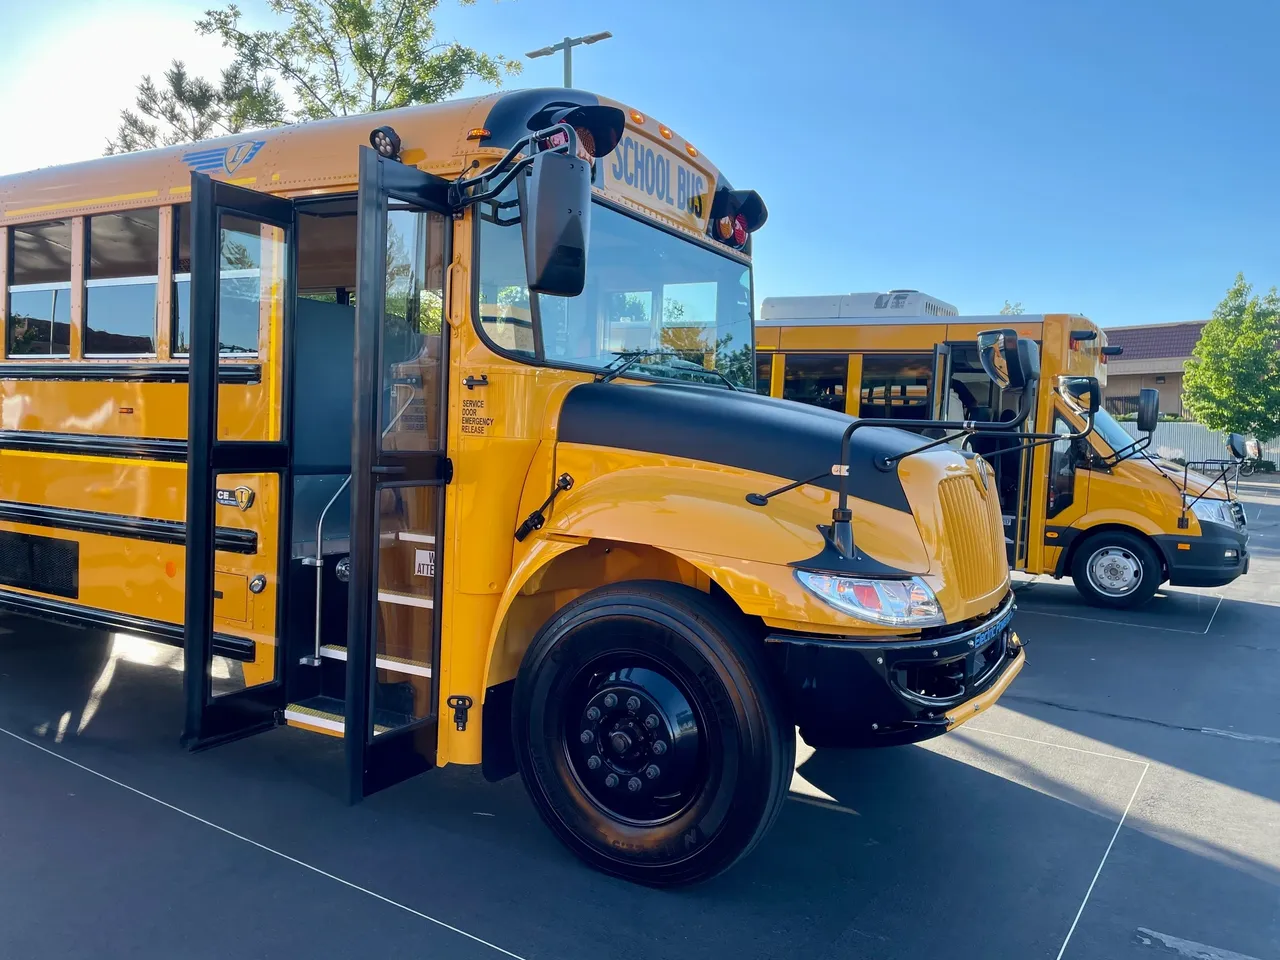 A yellow electric school bus parked in the parking lot.